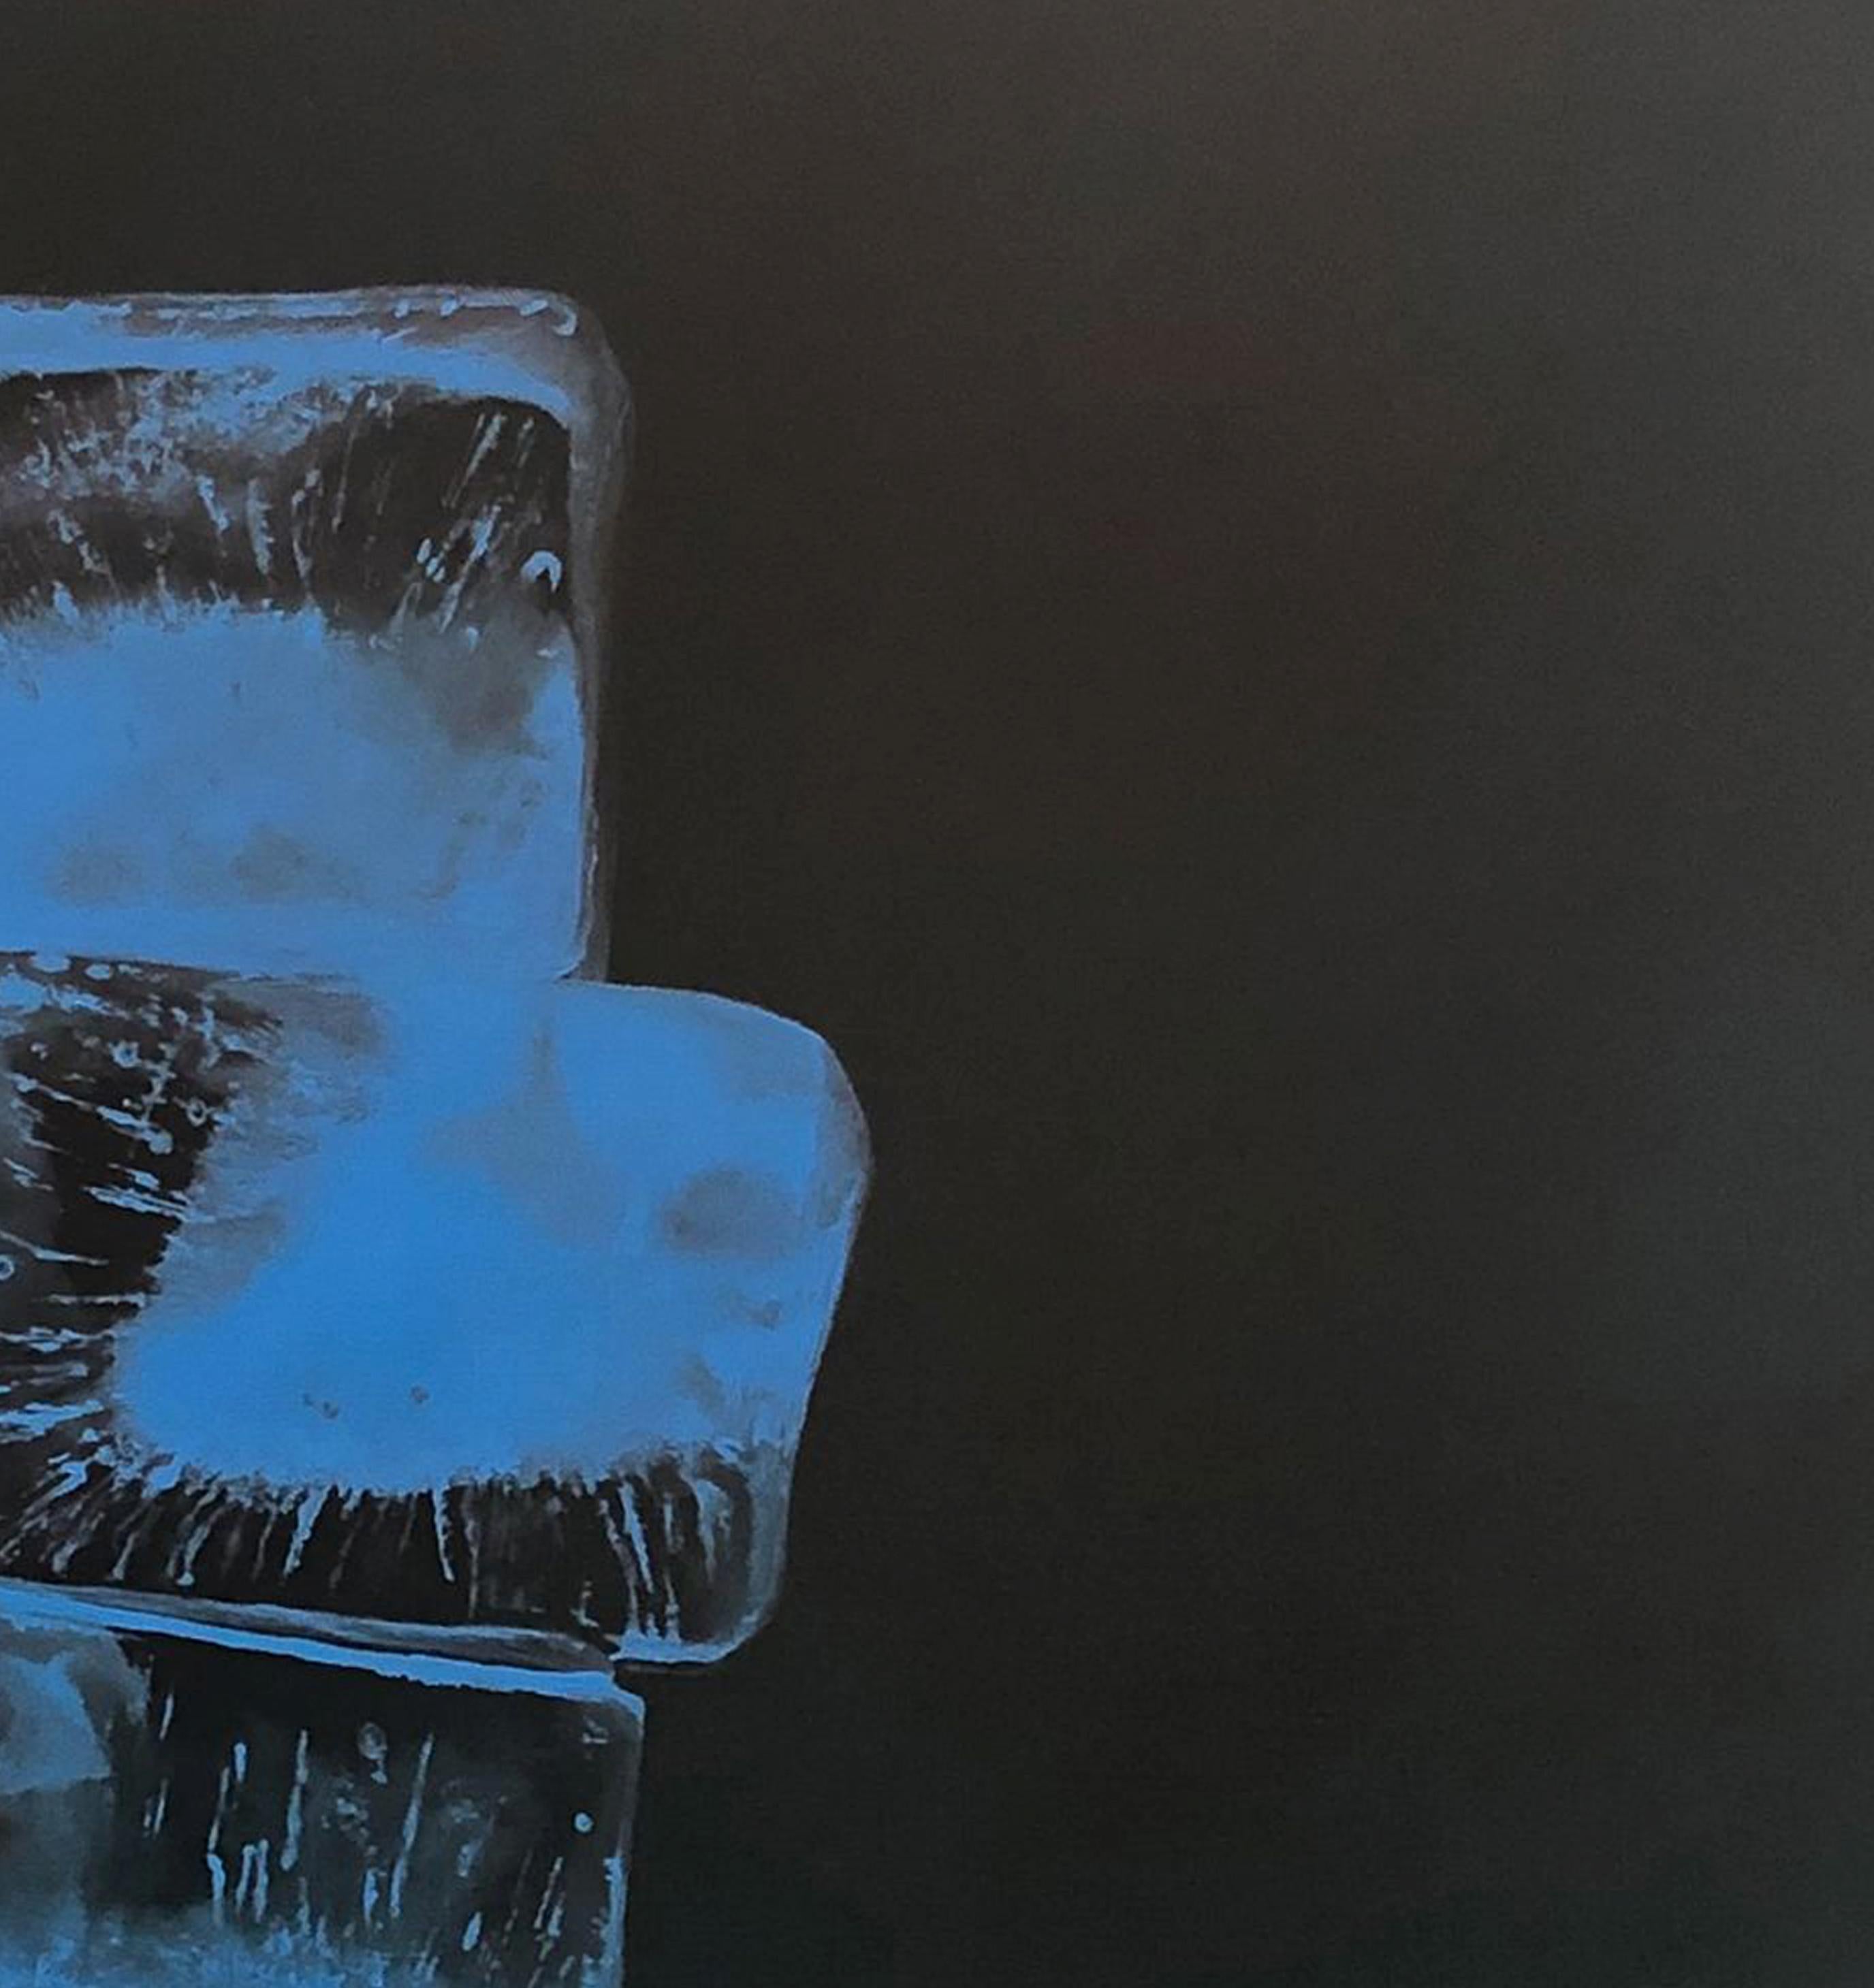 RISE AND FALL #5, light blue backdrop, hyper-realism, reflection, stack of ice - Contemporary Painting by Kevin Palme